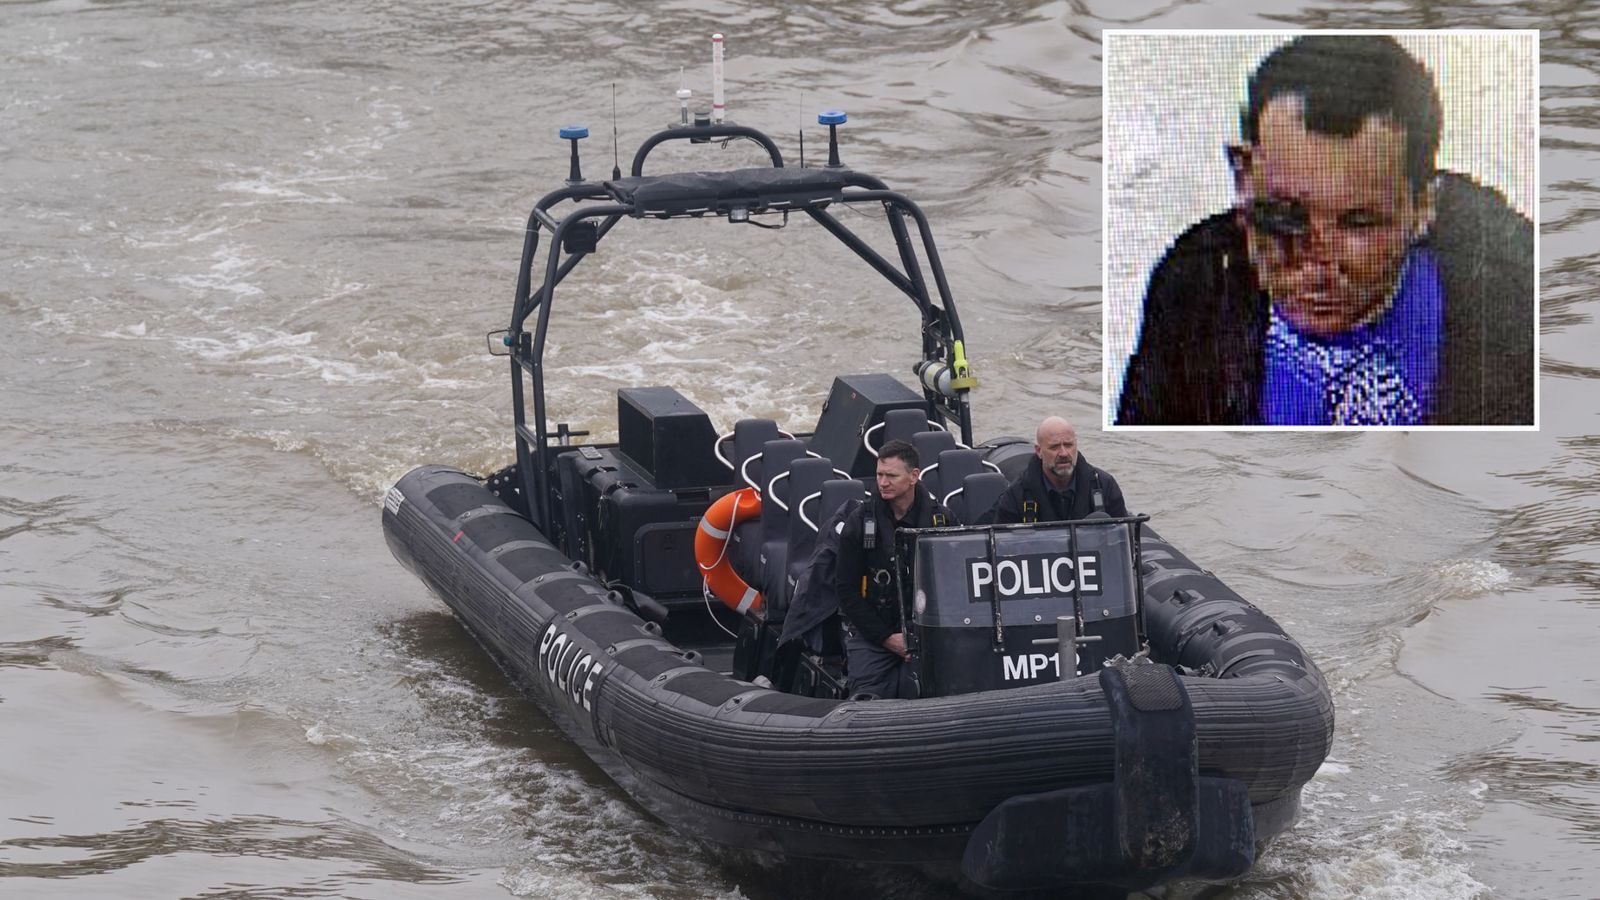 Abdul Ezedi: Body recovered from Thames confirmed as Clapham chemical attack suspect